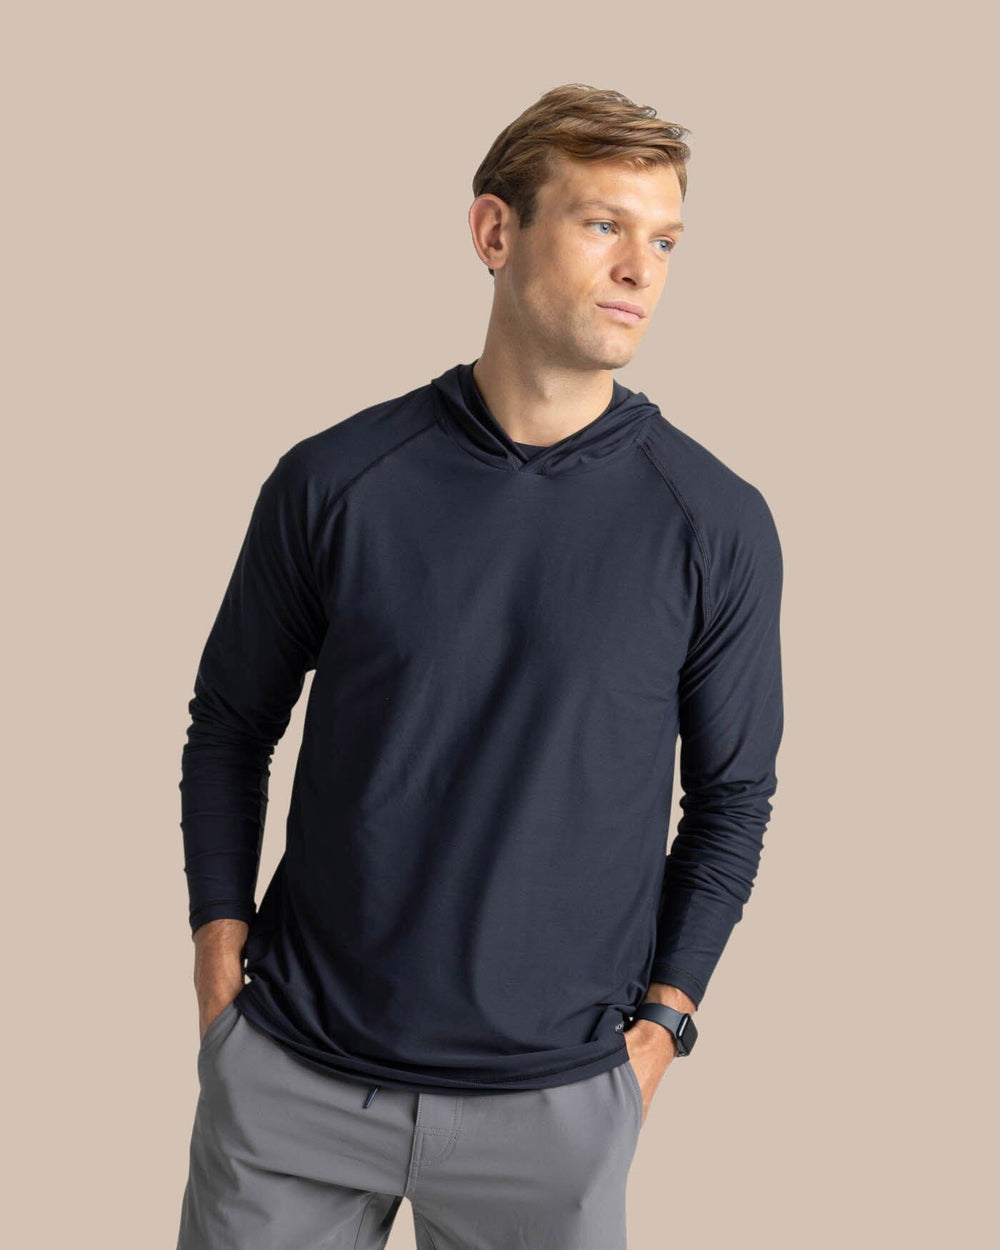 The front view of the Southern Tide brrr-illiant Performance Hoodie by Southern Tide - Caviar Black